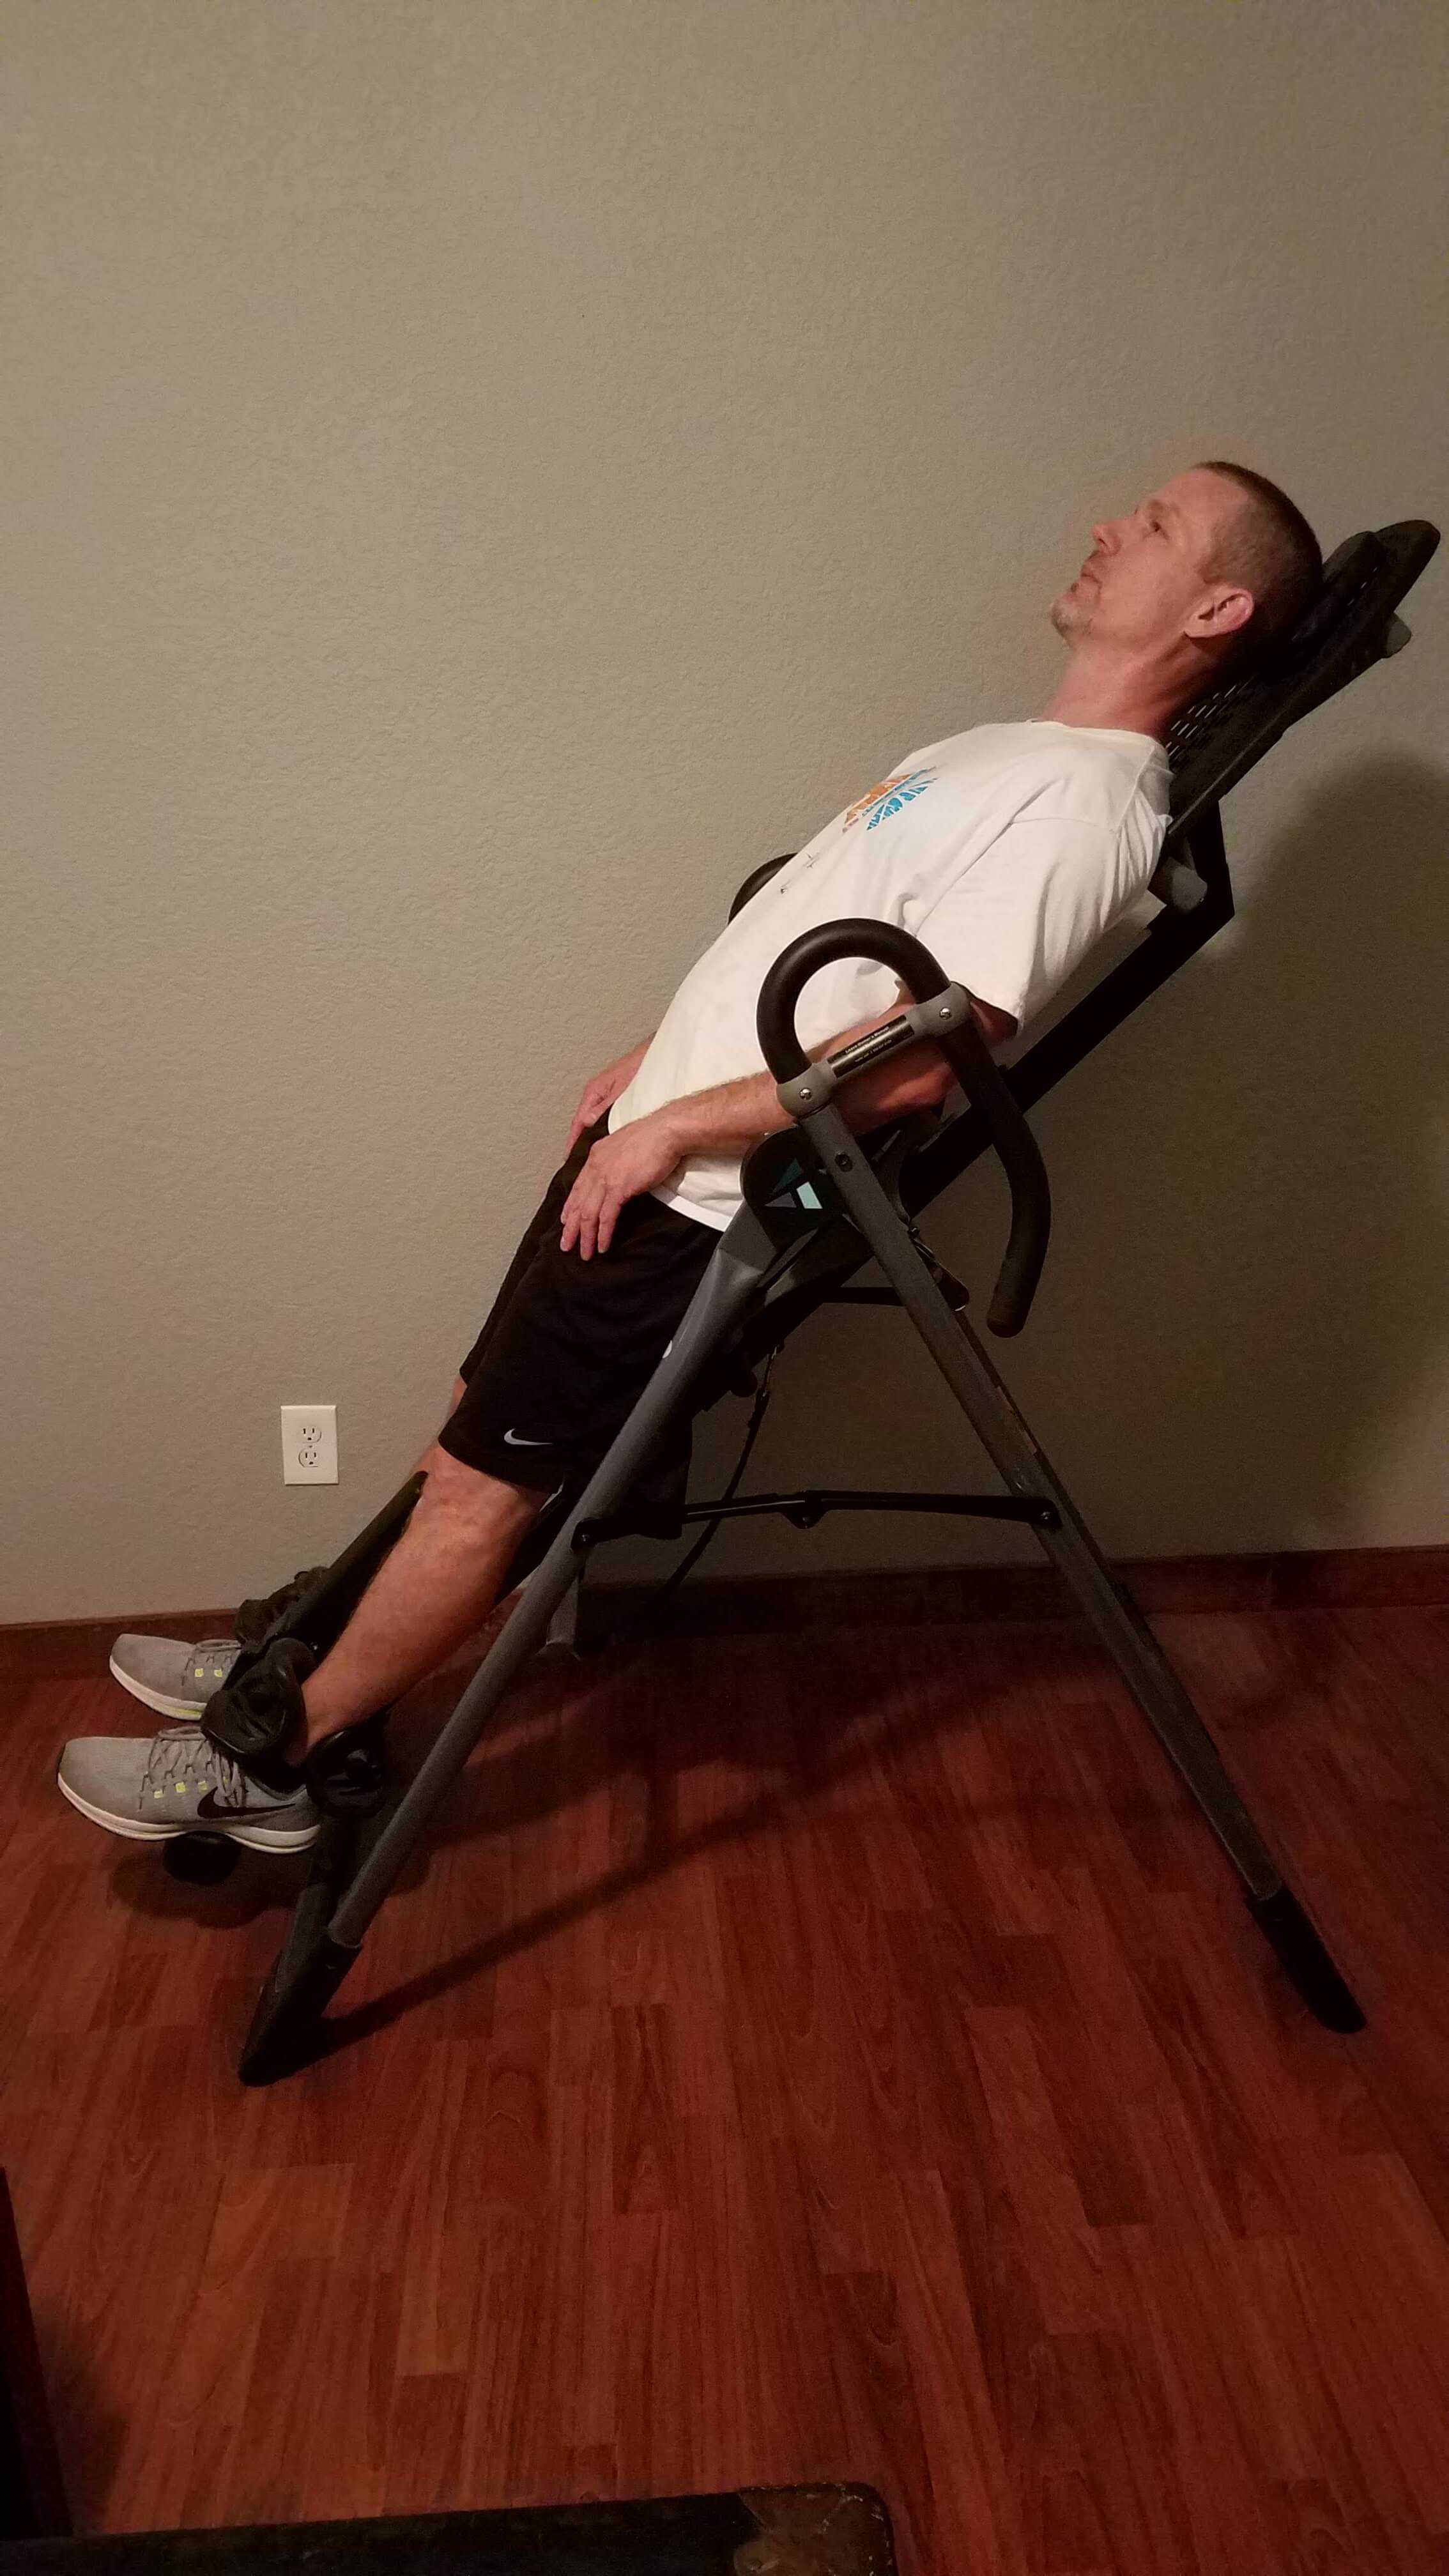 How to use an inversion table properly